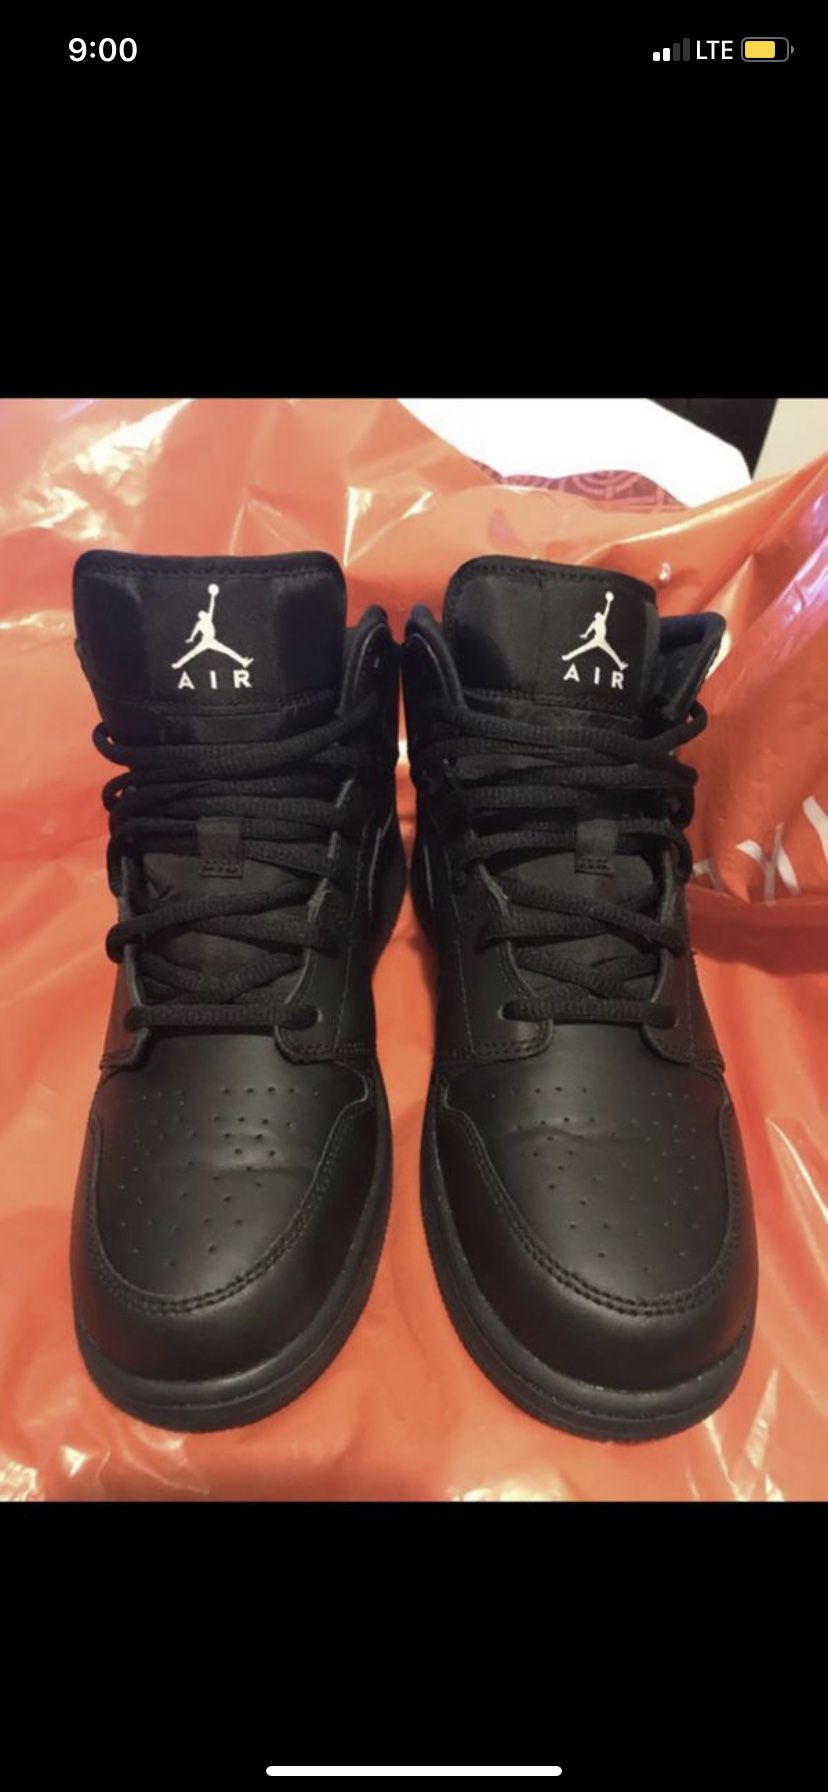 Jordans size 7 in excellent condition, black only worn once